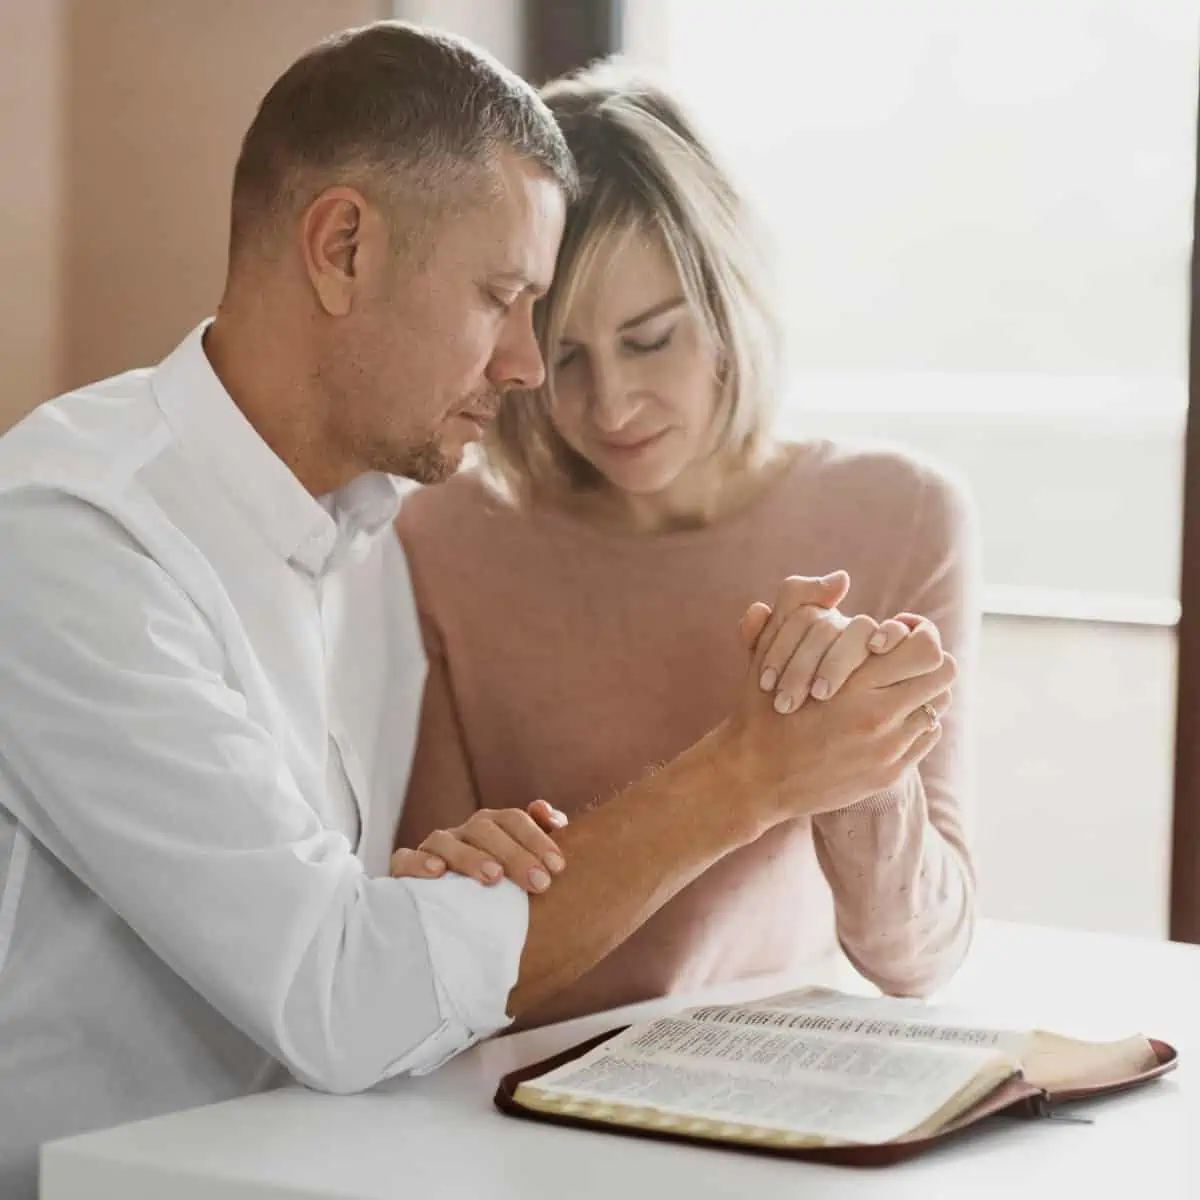 Image of husband and wife praying over the bible for the post how to love your wife as christ loves his church